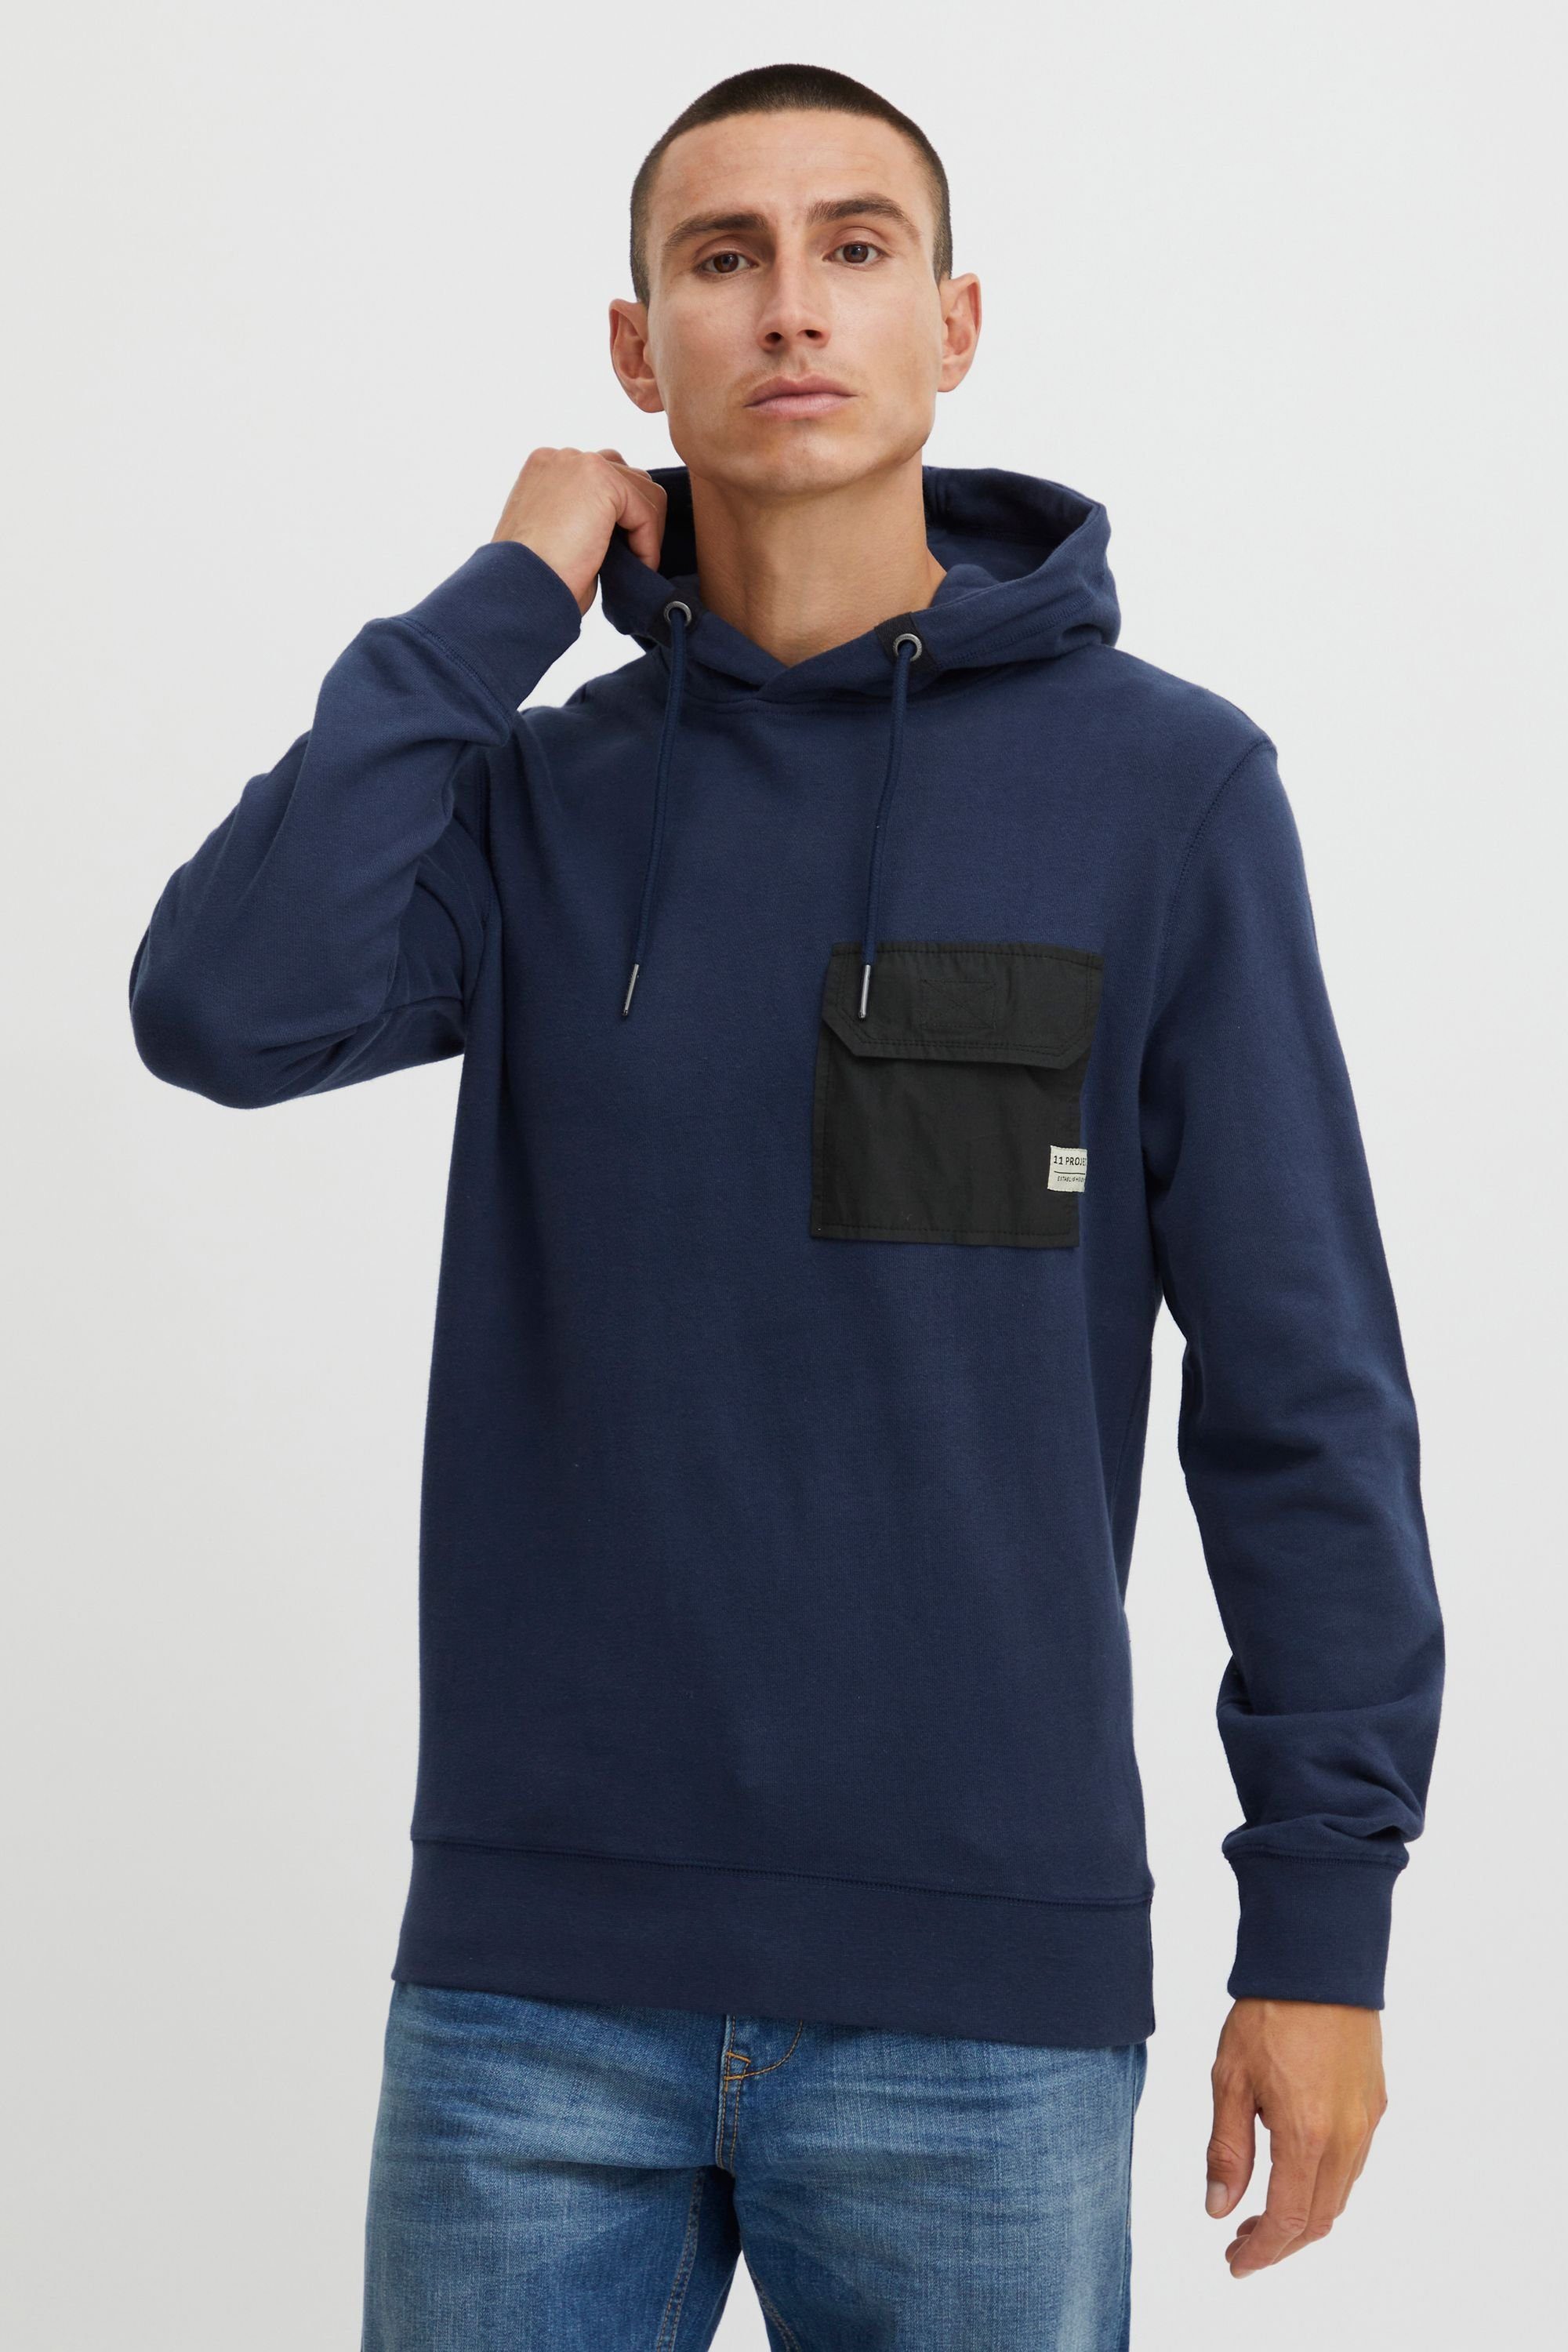 11 Project Project PRPelo Hoodie Dress Blues 11